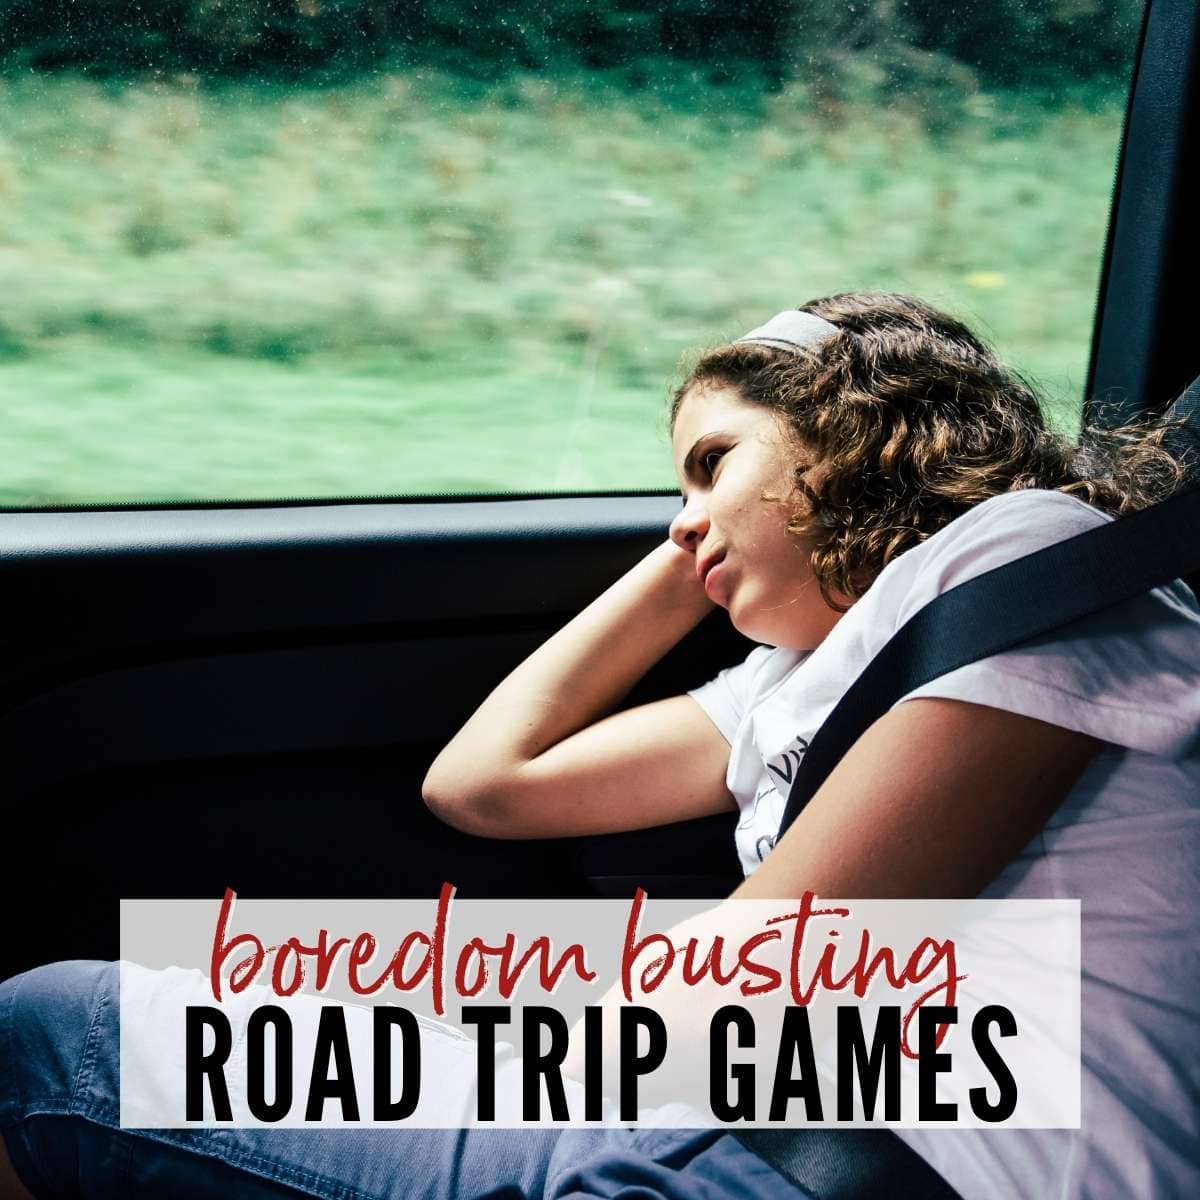 bored teenager in car with boredom busting road trip games graphic overlay